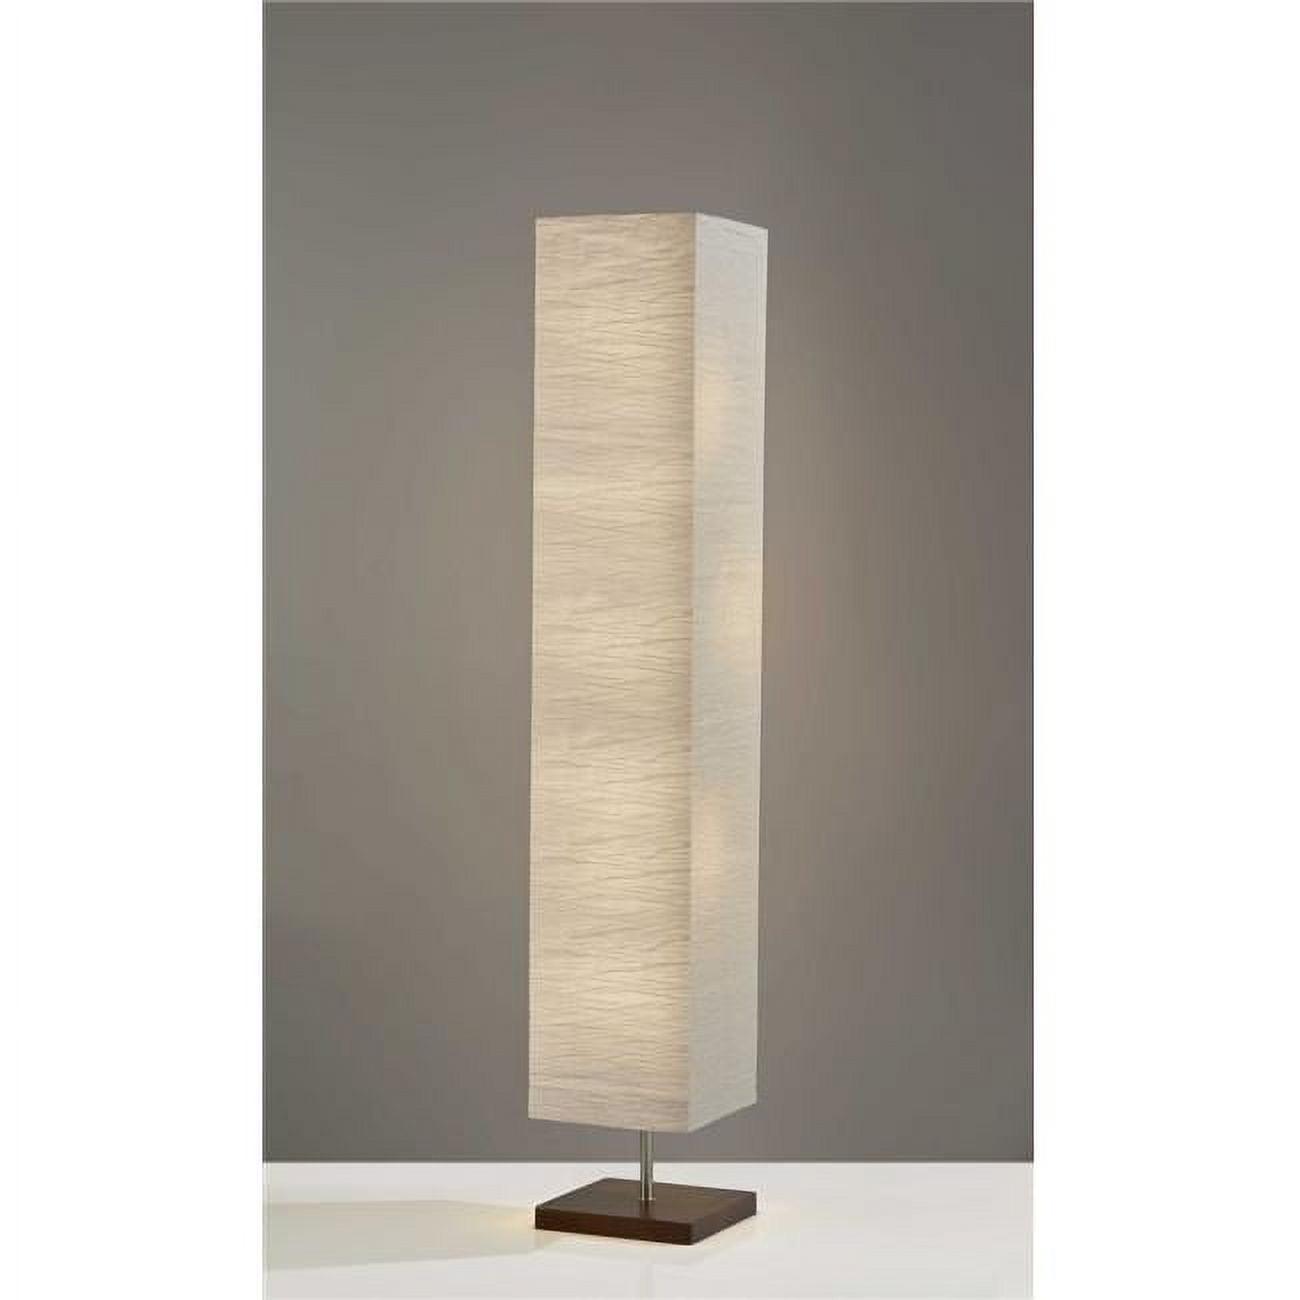 Walnut Wood Base Column Floor Lamp with White Paper Shade